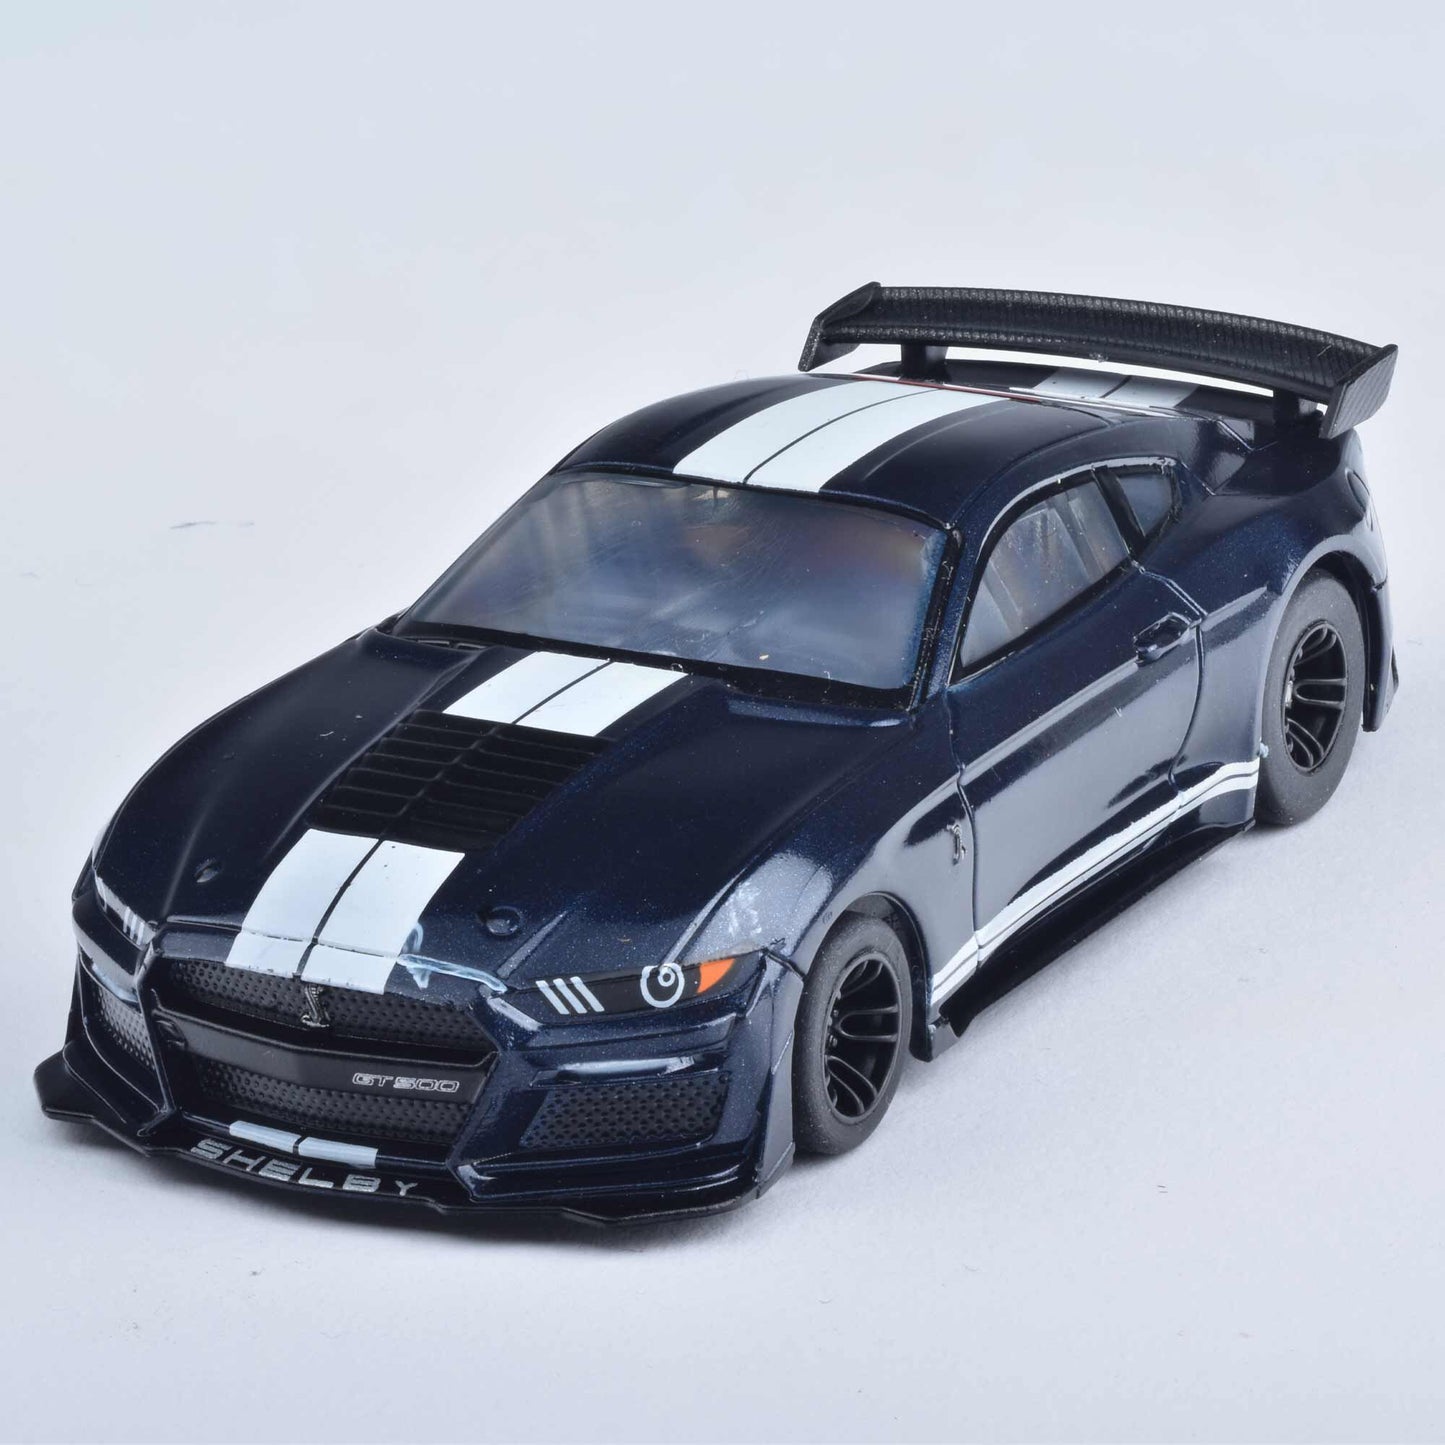 Horsepower Shootout Set (Limited Edition) - Dirt Cheap RC SAVING YOU MONEY, ONE PART AT A TIME